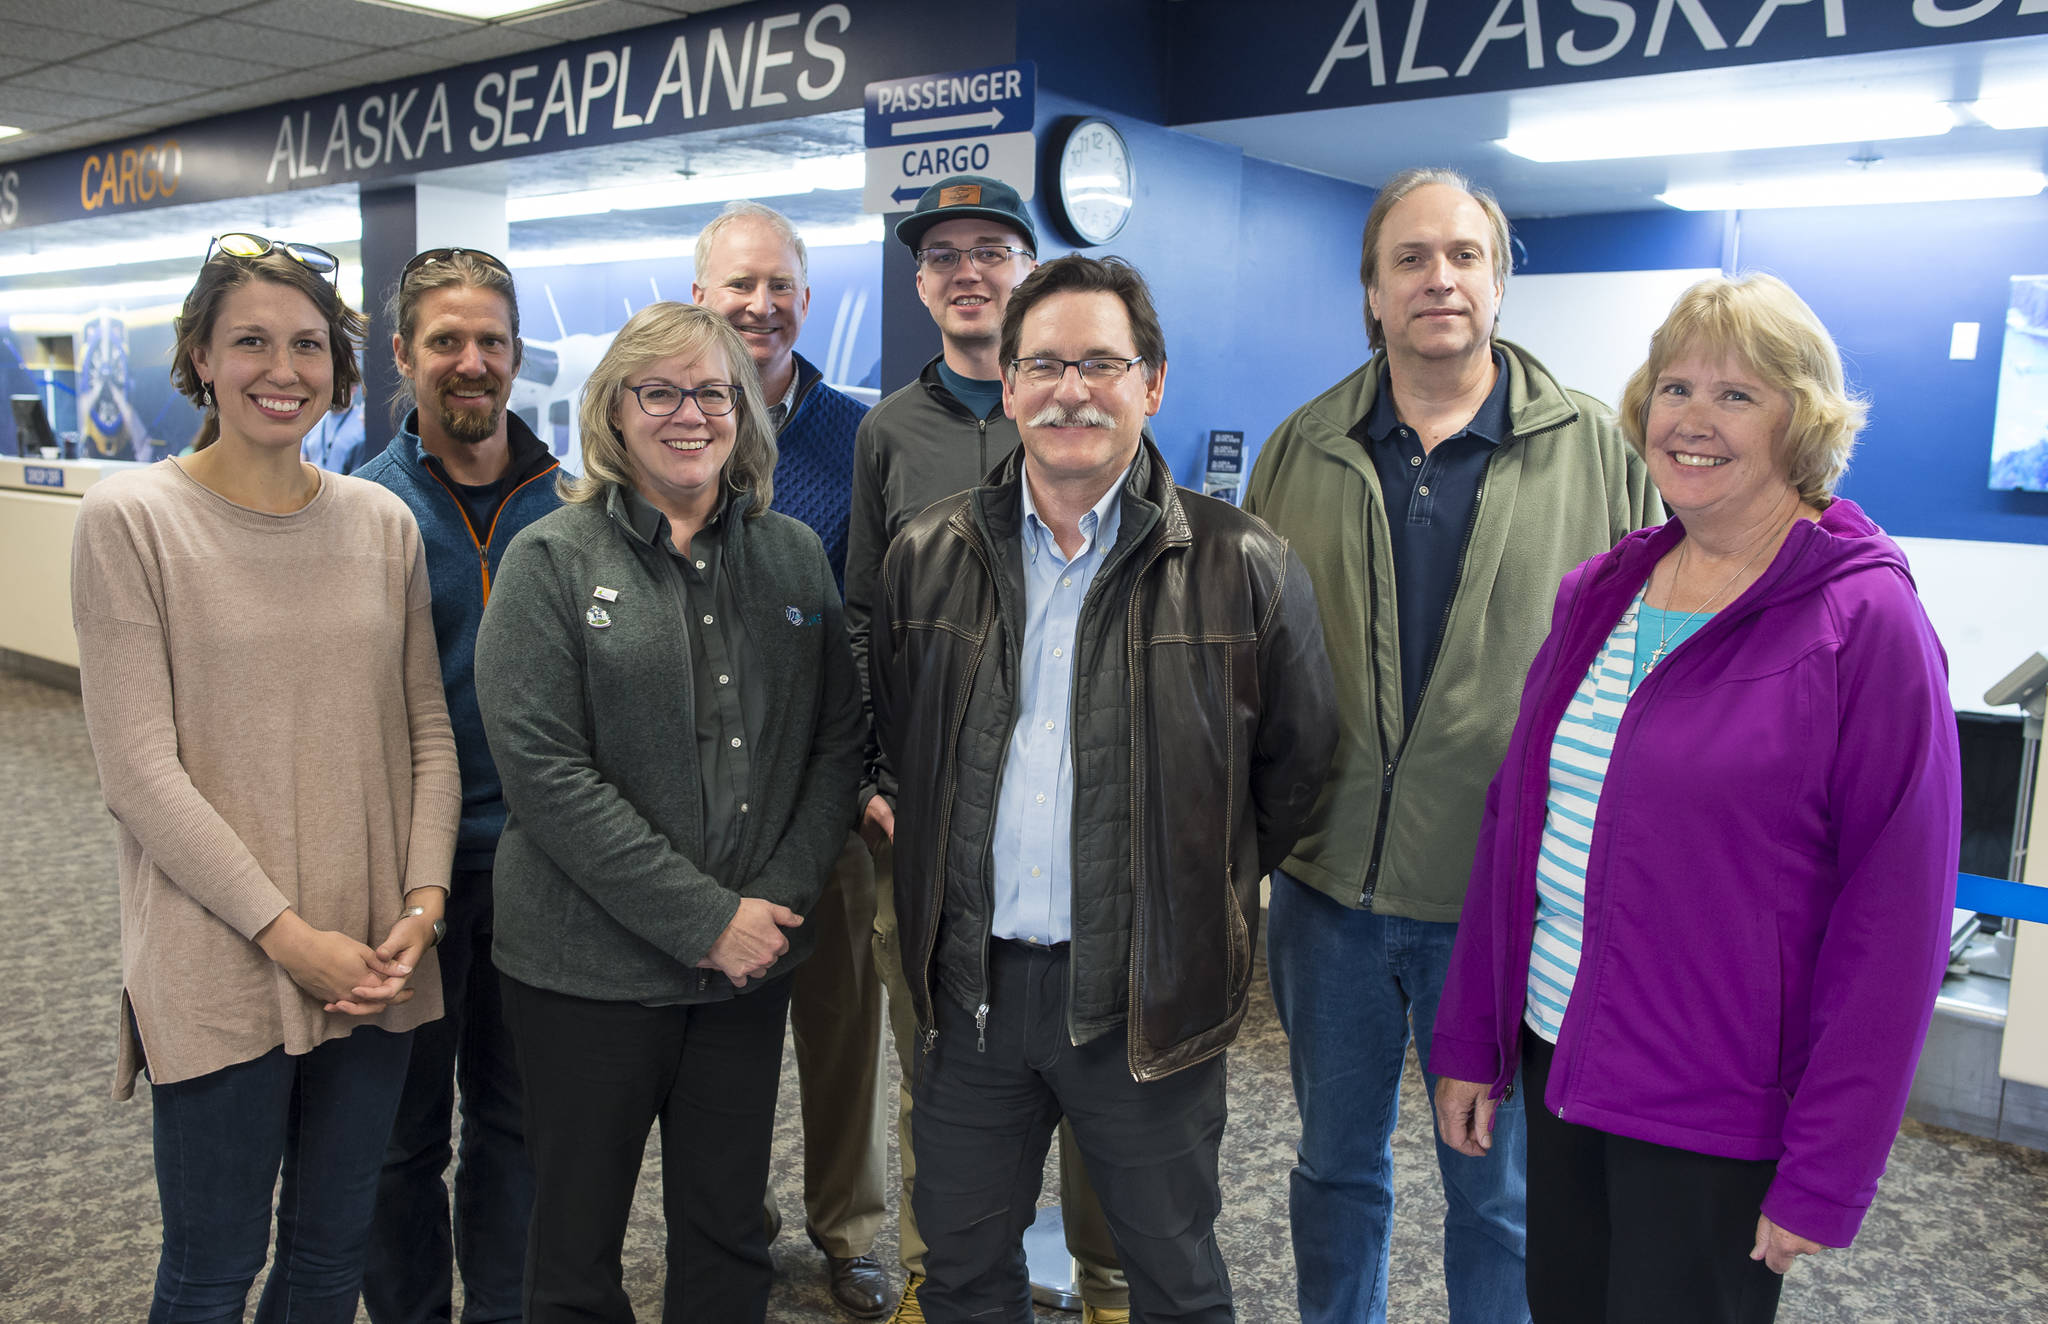 A Juneau delegation poses for a picture after returning on the last Alaska Seaplanes flight of the season from an Economic Trade Mission in Whitehorse on Tuesday, Sept. 18, 2018. From left: Mary Berry, Alaska Glacier Seafoods, Dave Scanlan, Eaglecrest, Liz Perry, Travel Juneau, Brian Holst, Juneau Economic Development Council, Charles Herrington, Eaglecrest, Jim Powell, UAS, Keith Comstock, Juneau Hydropower and Barbara Burnett, Juneau Sister Cities Committee. Attending the mission but not pictured are Carl Ramseth, Alaska Seaplanes, and Jerry Burnett. (Michael Penn | Juneau Empire)